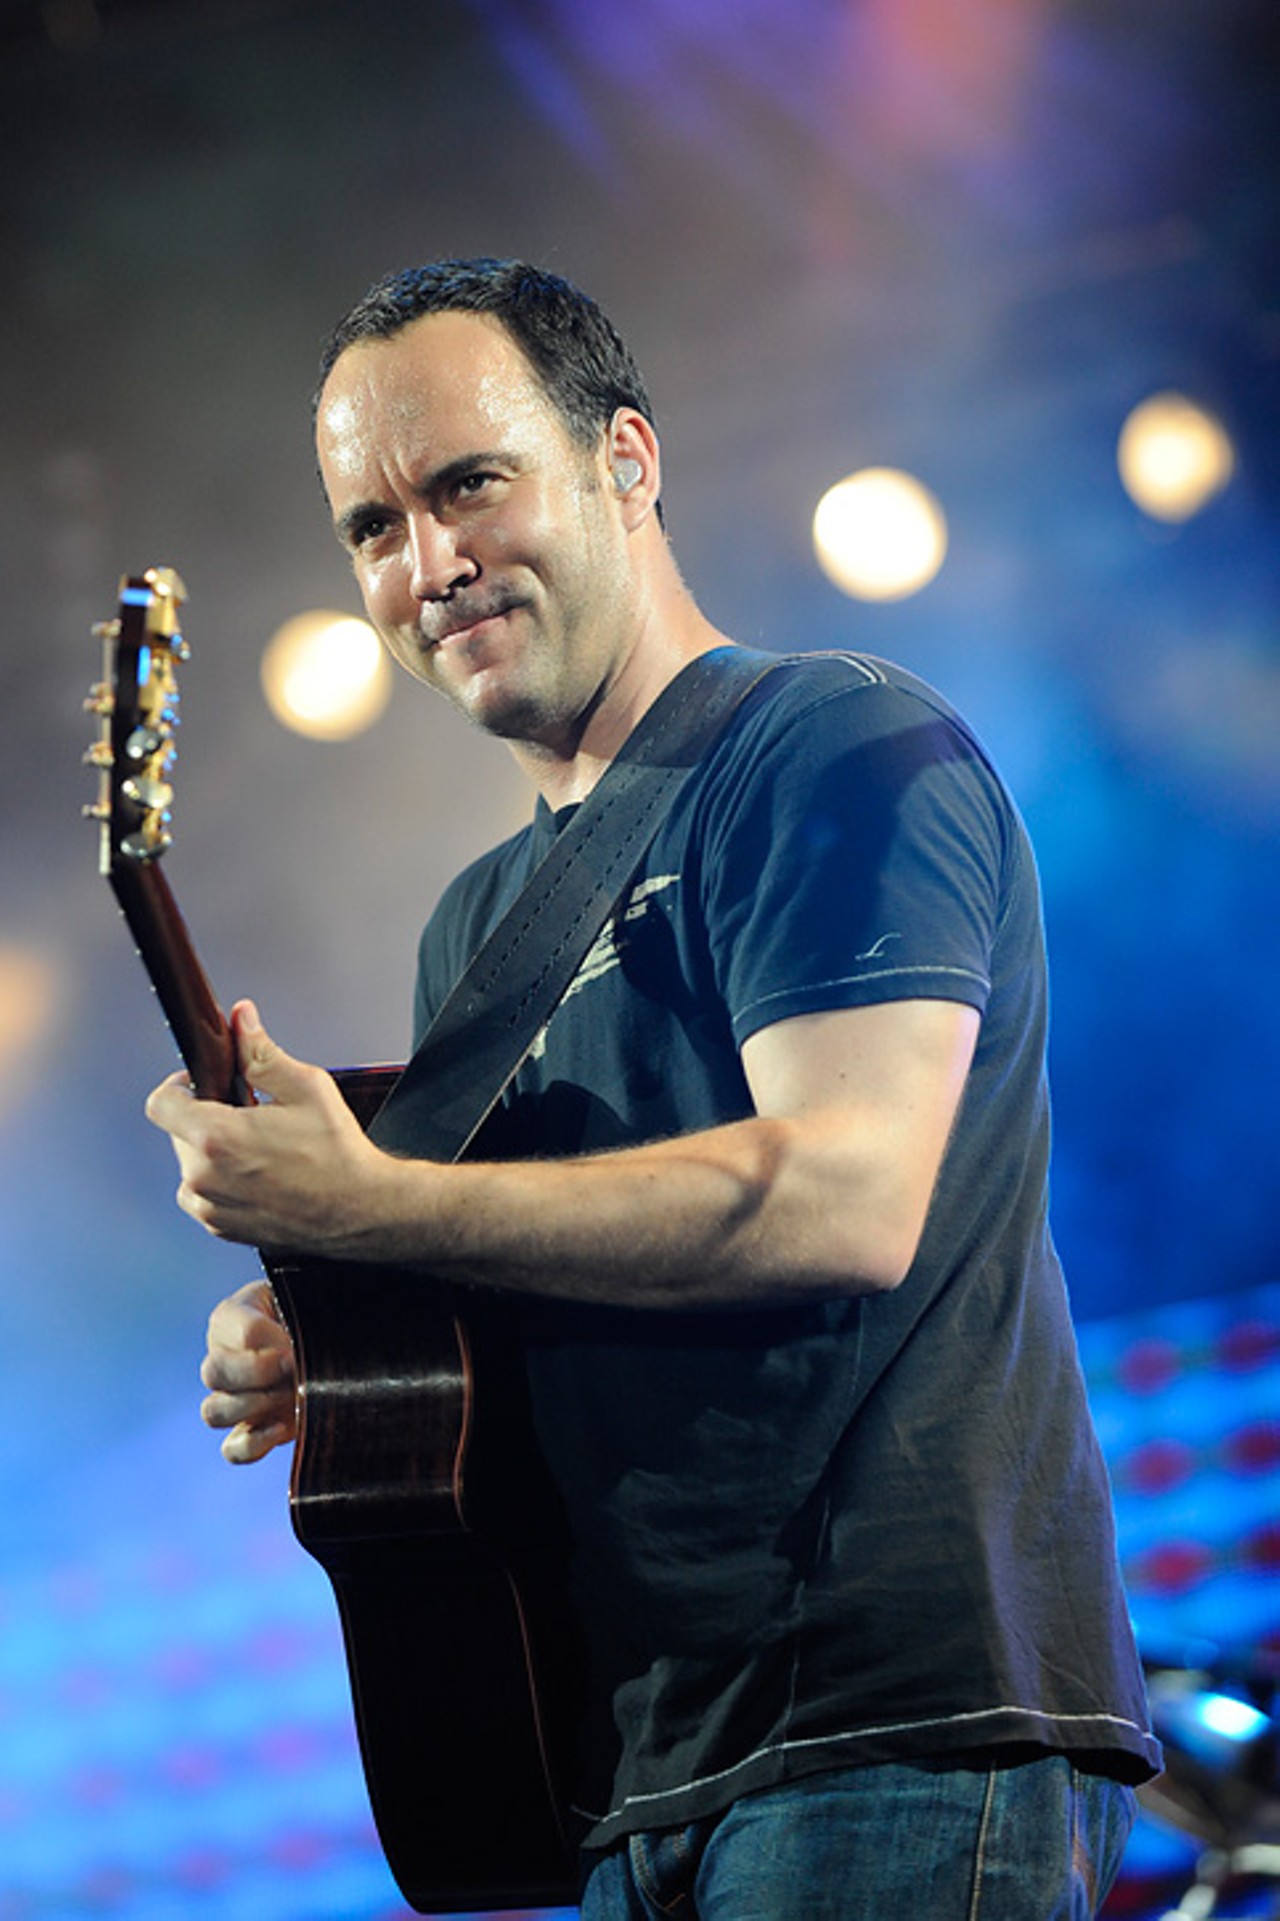 Dave Matthews performed with obvious gusto and energy, delivering fan-favorite "Crash" early on in the set.